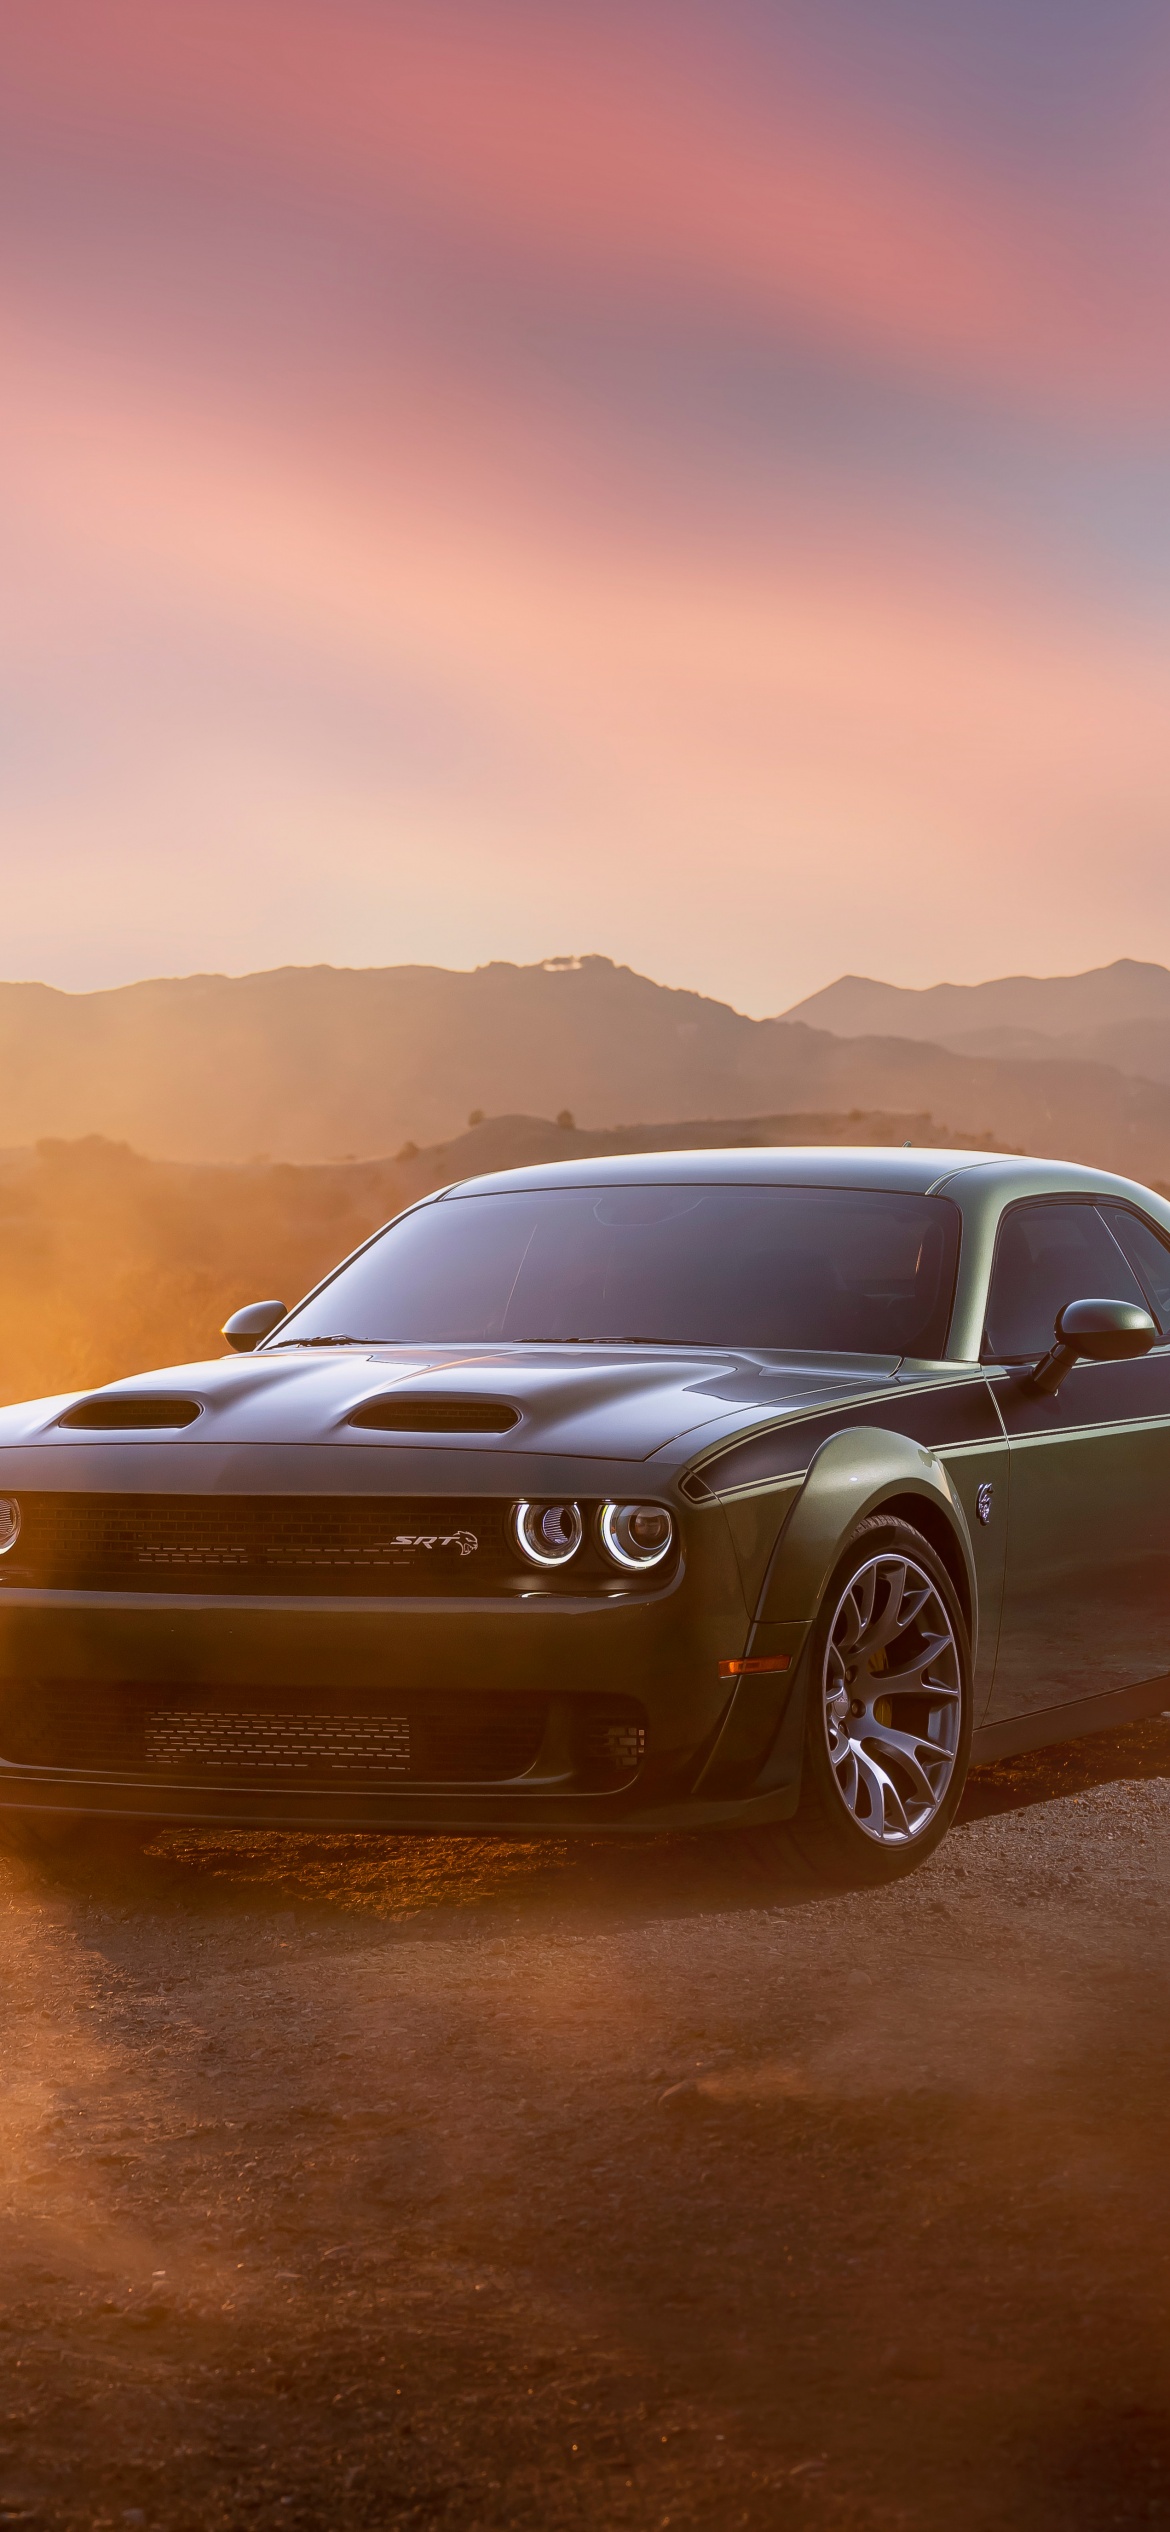 Download DrivingLuxury at its Finest with the Dodge Challenger Wallpaper   Wallpaperscom